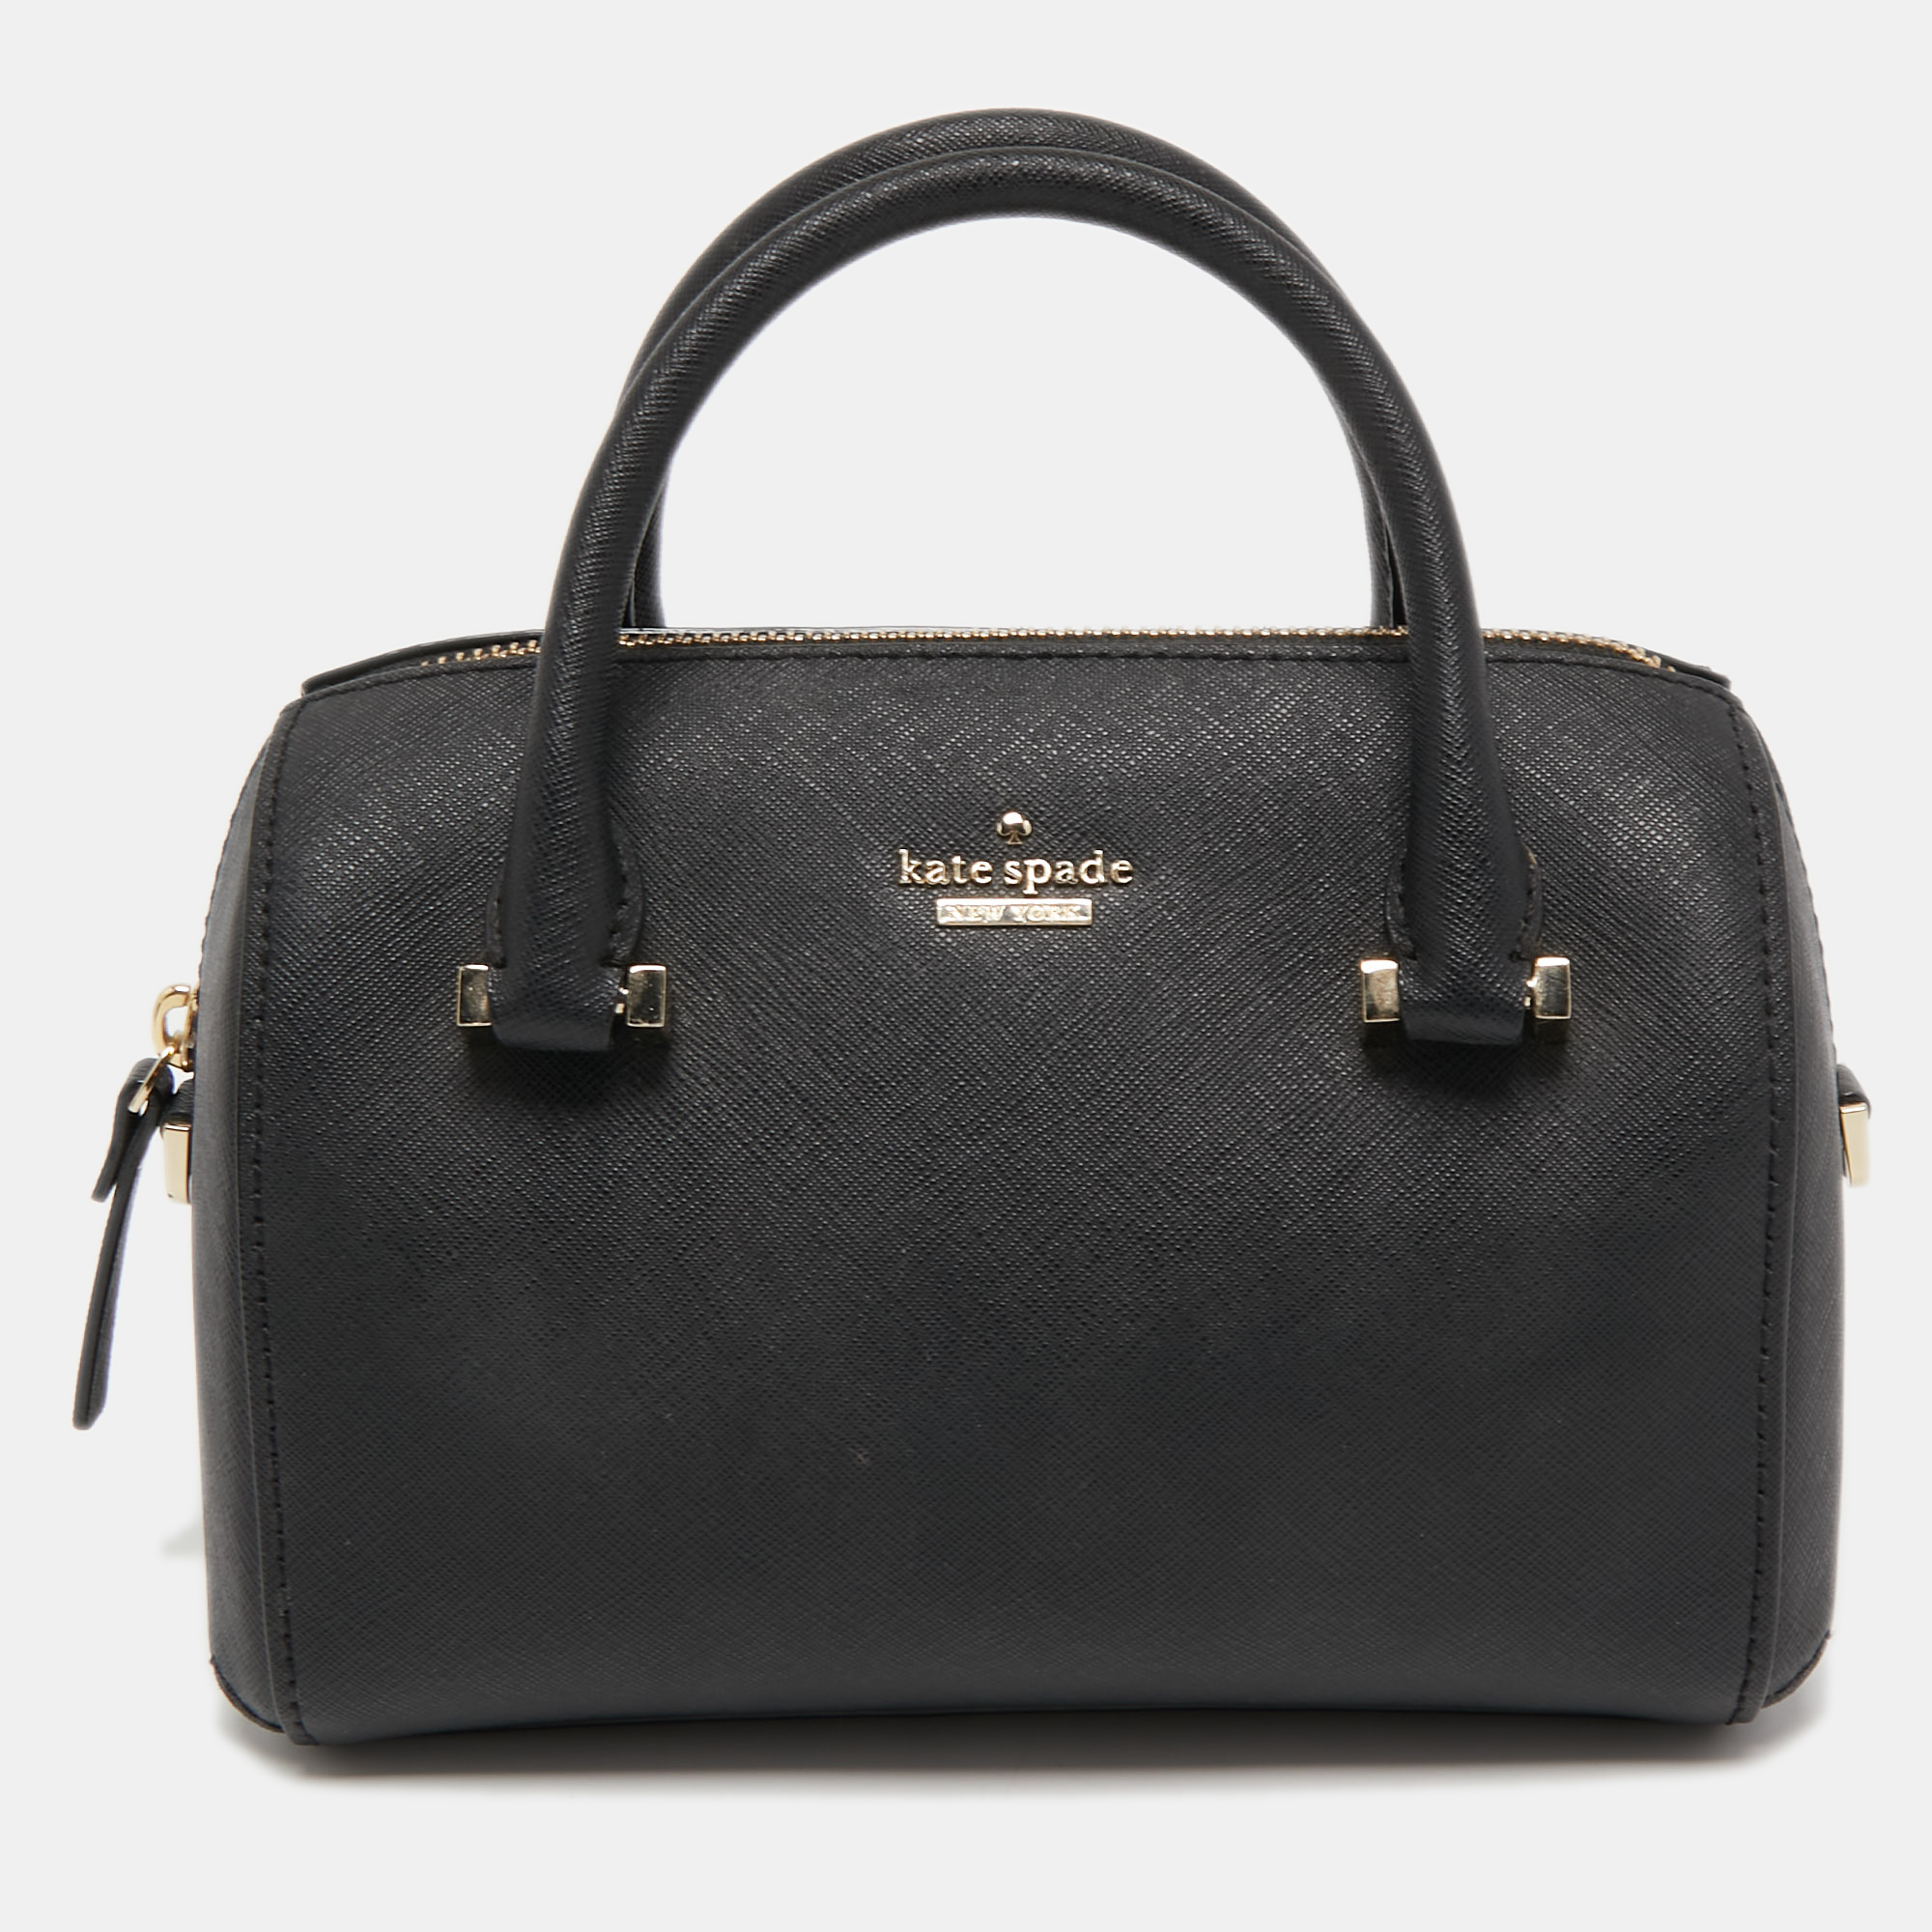 Pre-owned Kate Spade Black Leather Satchel